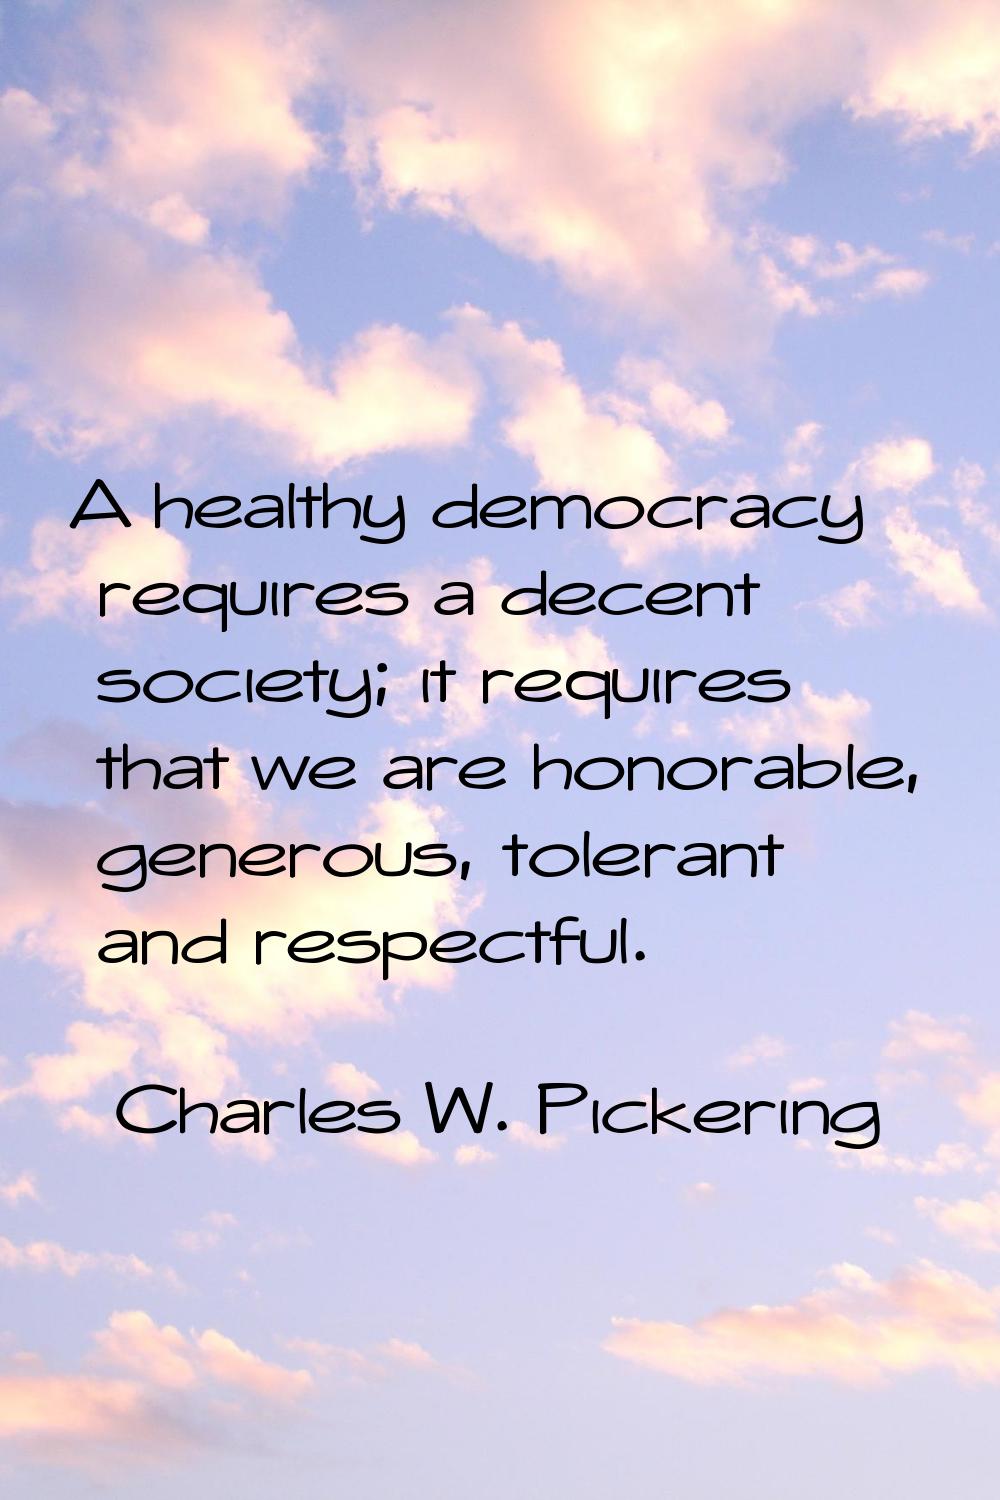 A healthy democracy requires a decent society; it requires that we are honorable, generous, toleran